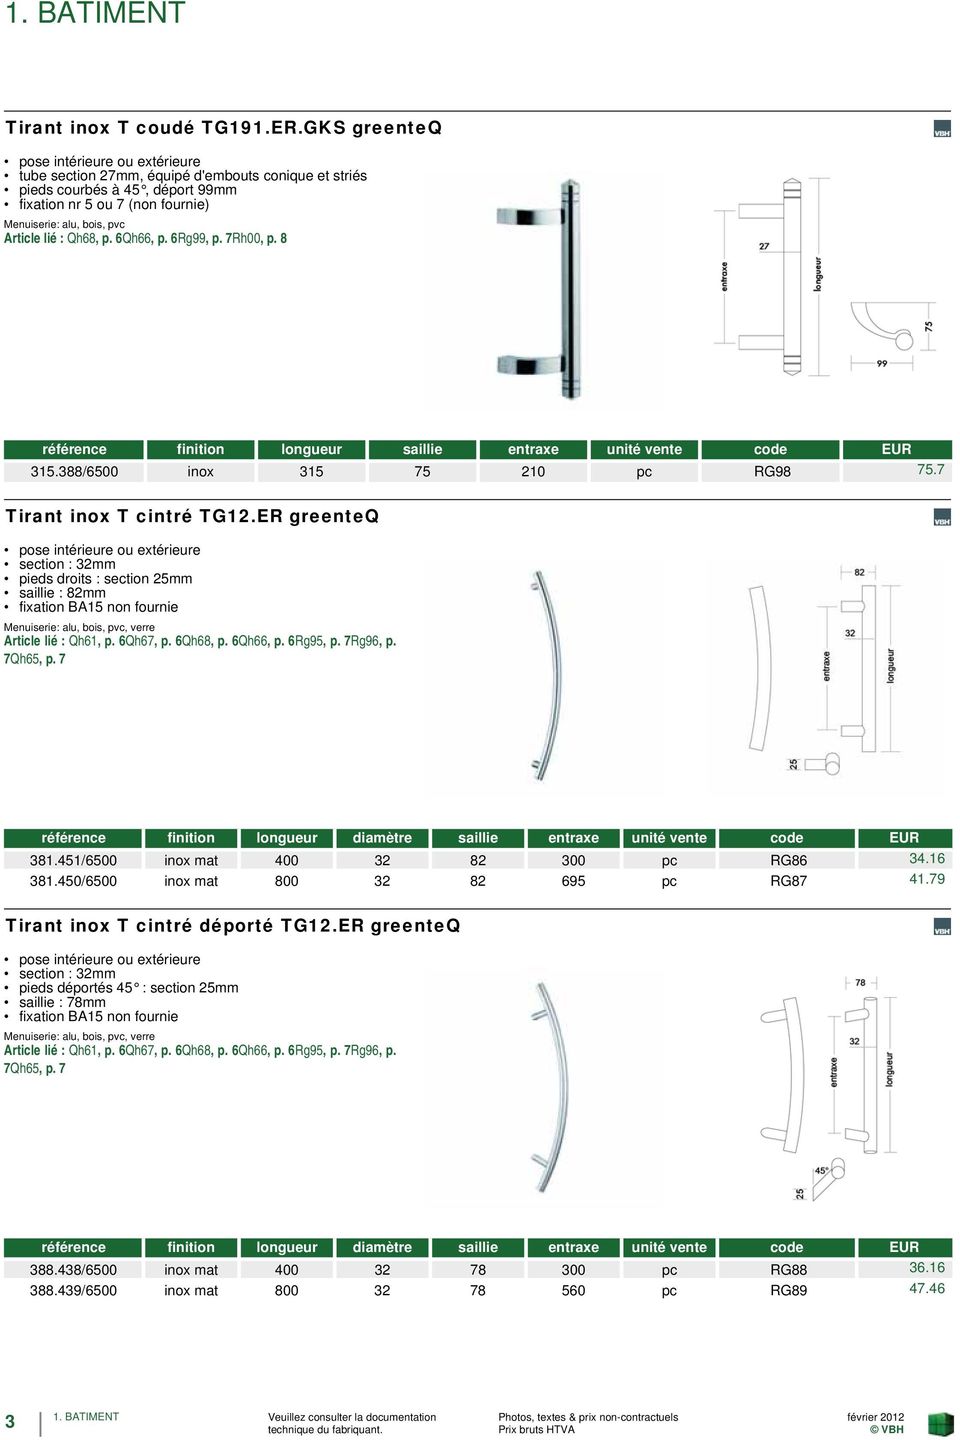 ER greenteq section : 32mm pieds droits : section 25mm saillie : 82mm fixation BA15 non fournie, verre Article lié : Qh61, p. 6Qh67, p. 6Qh68, p. 6Qh66, p. 6Rg95, p. 7Rg96, p. 7Qh65, p.